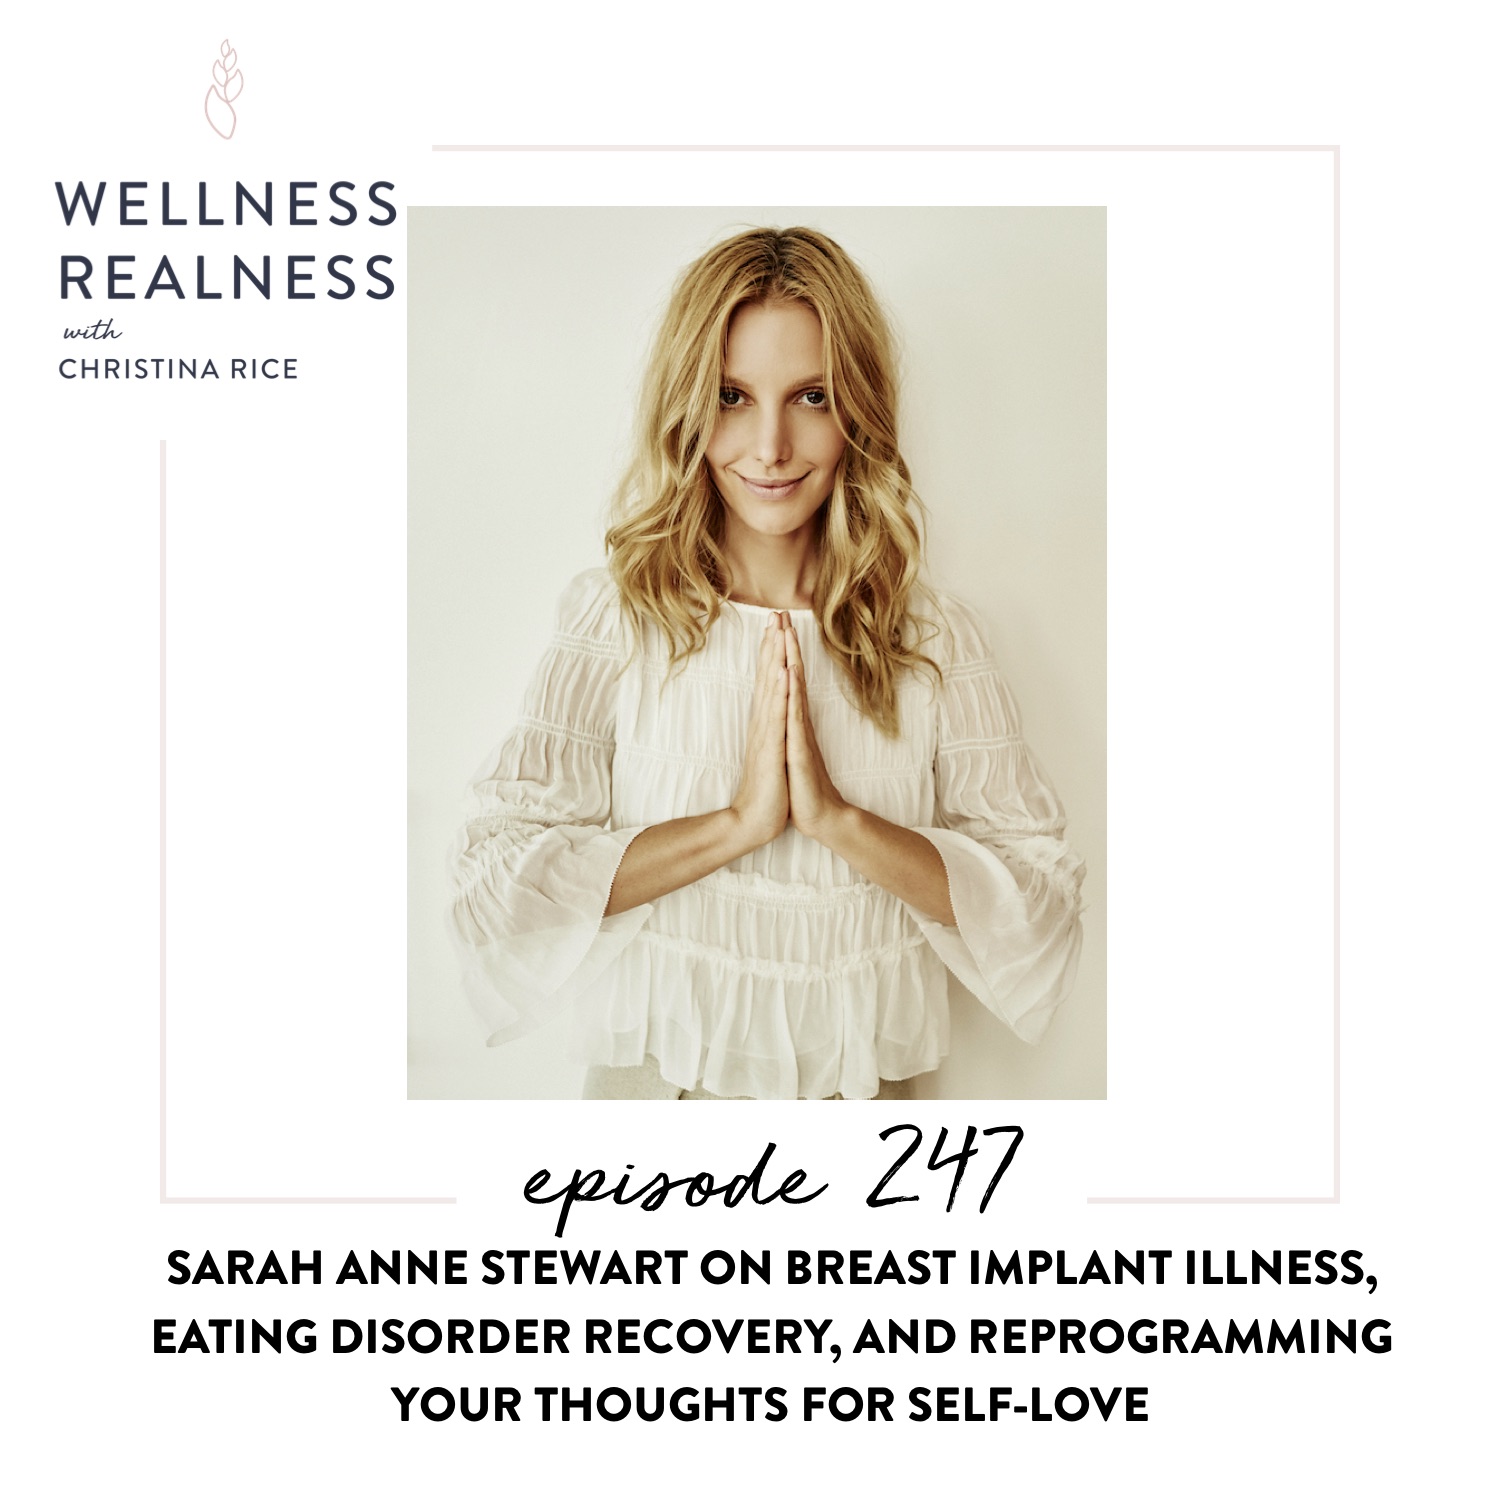 247: Sarah Anne Stewart on Breast Implant Illness, Eating Disorder Recovery, and Reprogramming Your Thoughts for Self-Love